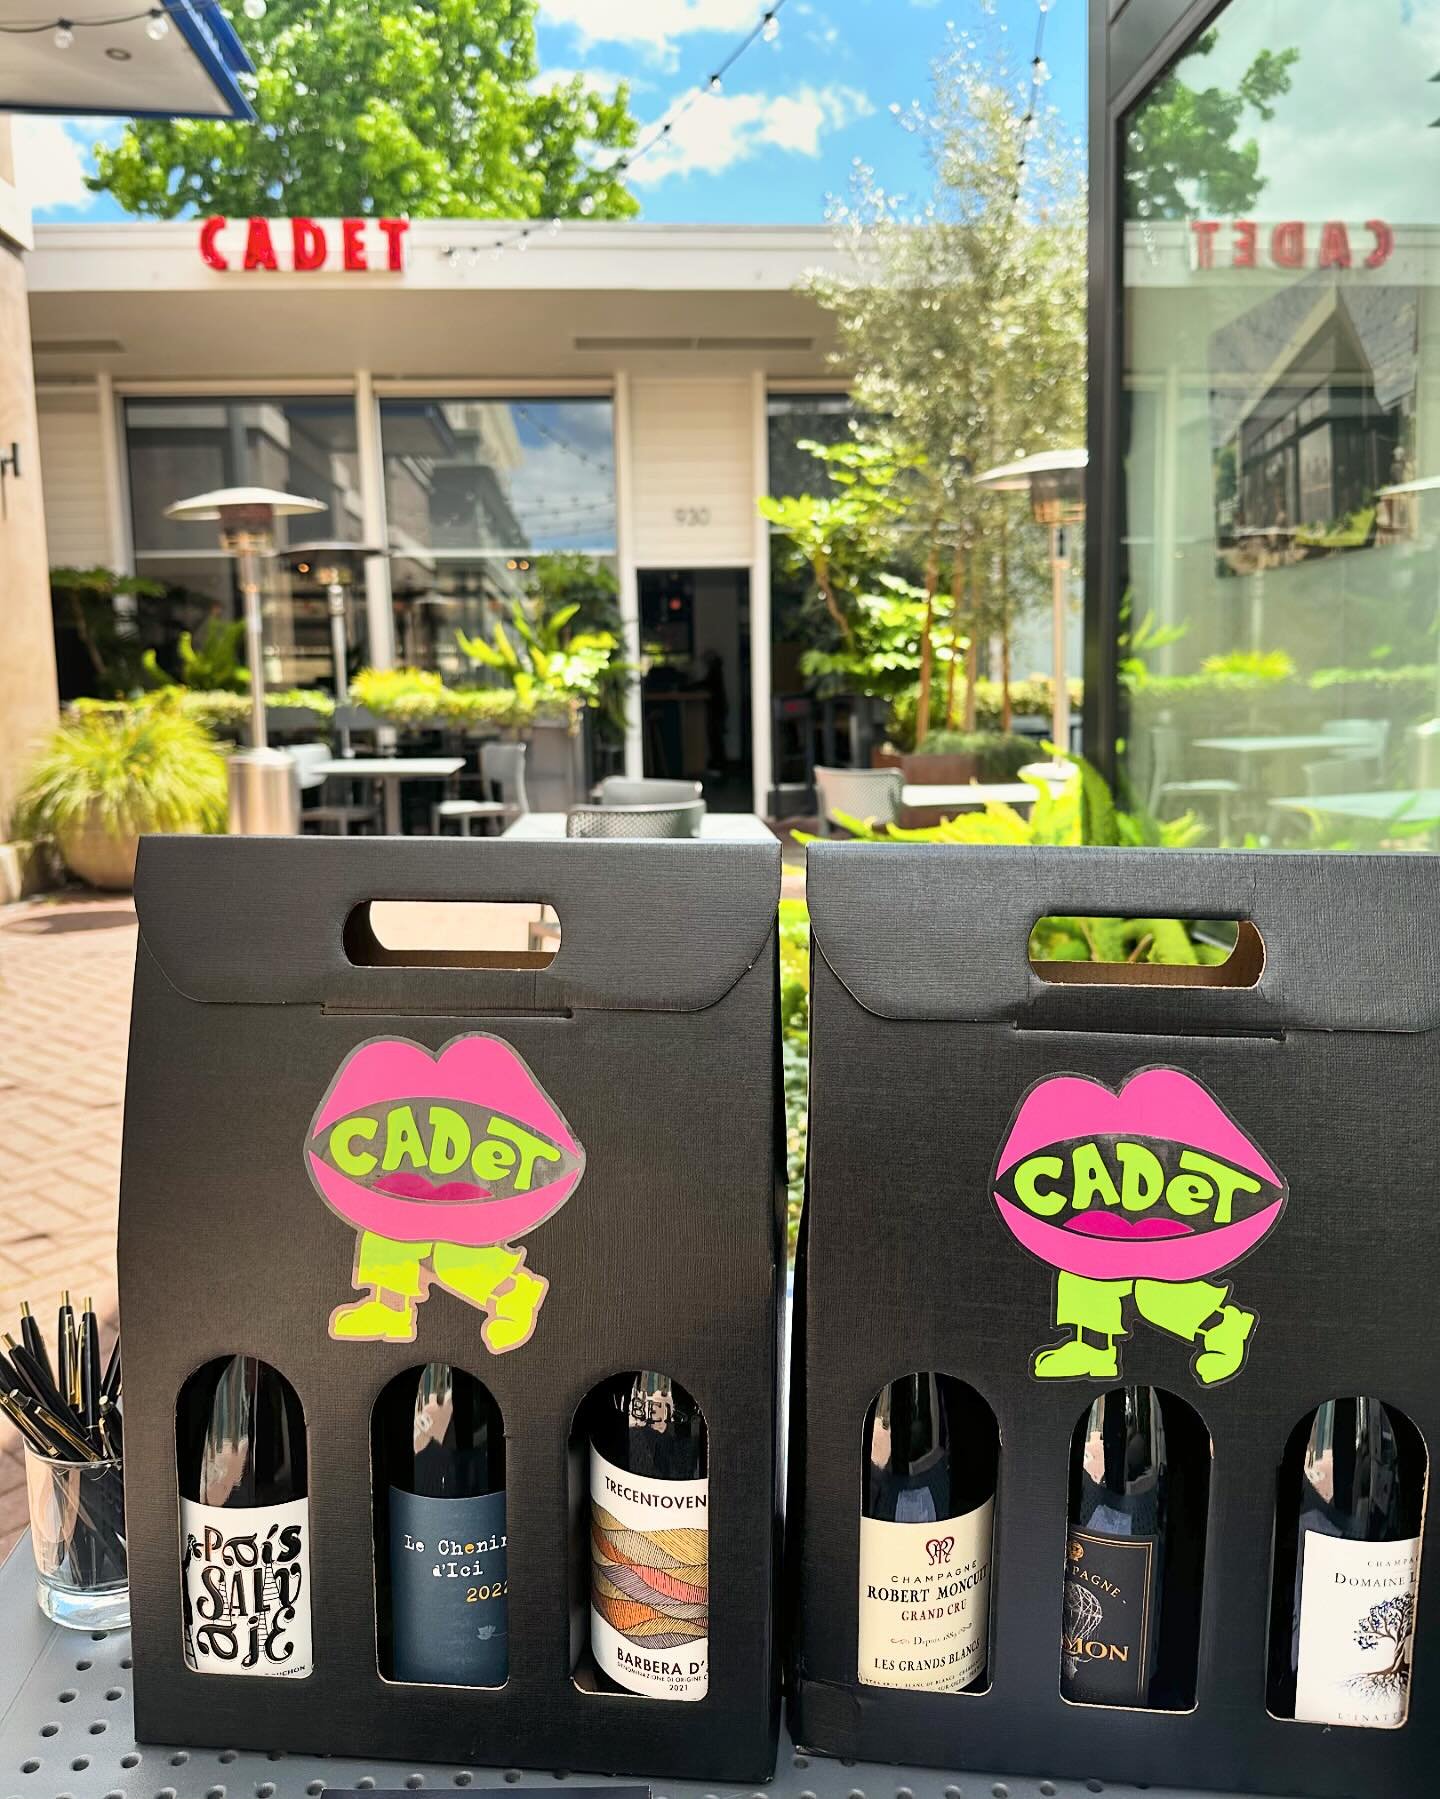 Sun&rsquo;s out, bottles out! 🌞 It&rsquo;s our CLUB CADET pick-up party time! Interested in joining the club? Opt for the Juice Club or Bubble Club 🍾 Enjoy 3 bottles quarterly, invites to exclusive events, and discounts on our entire wine list. Sig